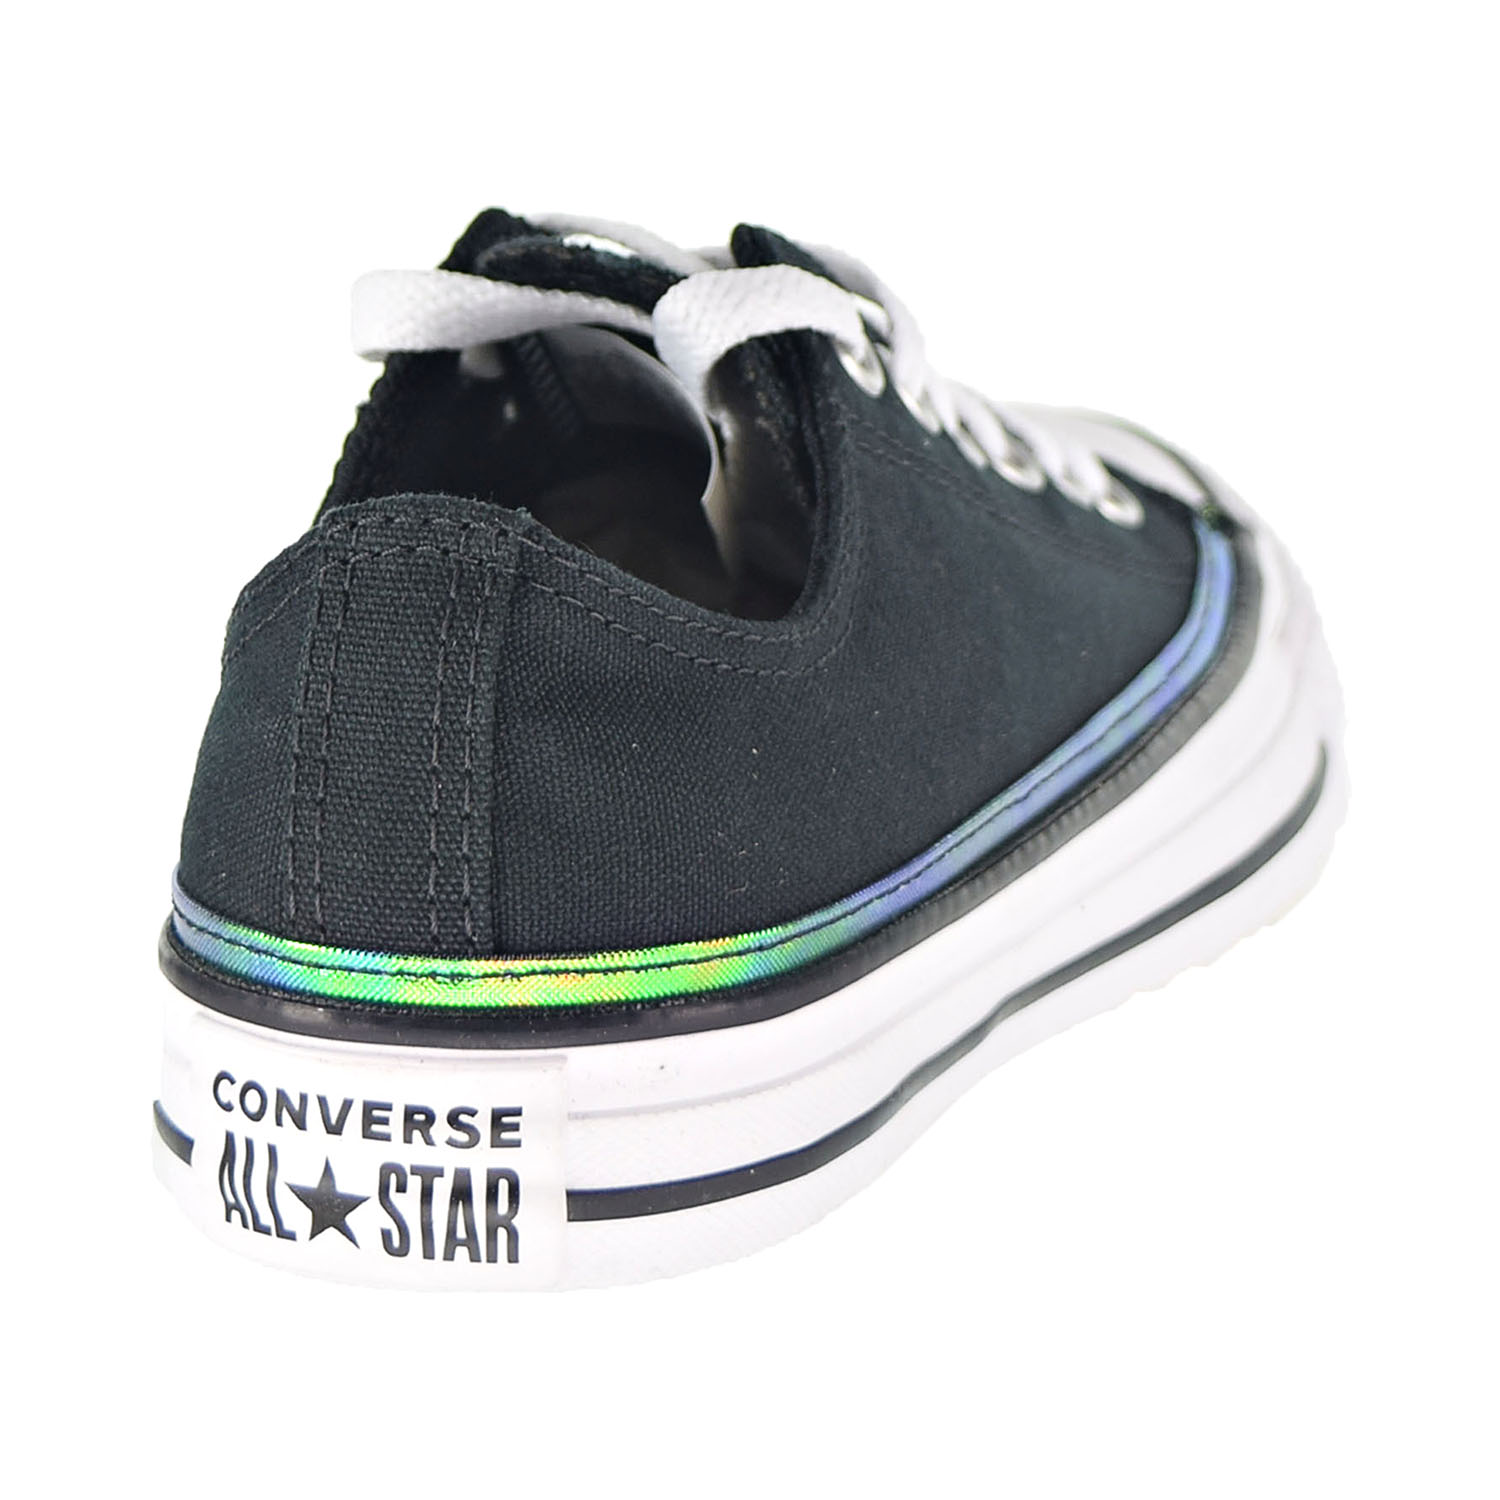 iridescent converse shoes